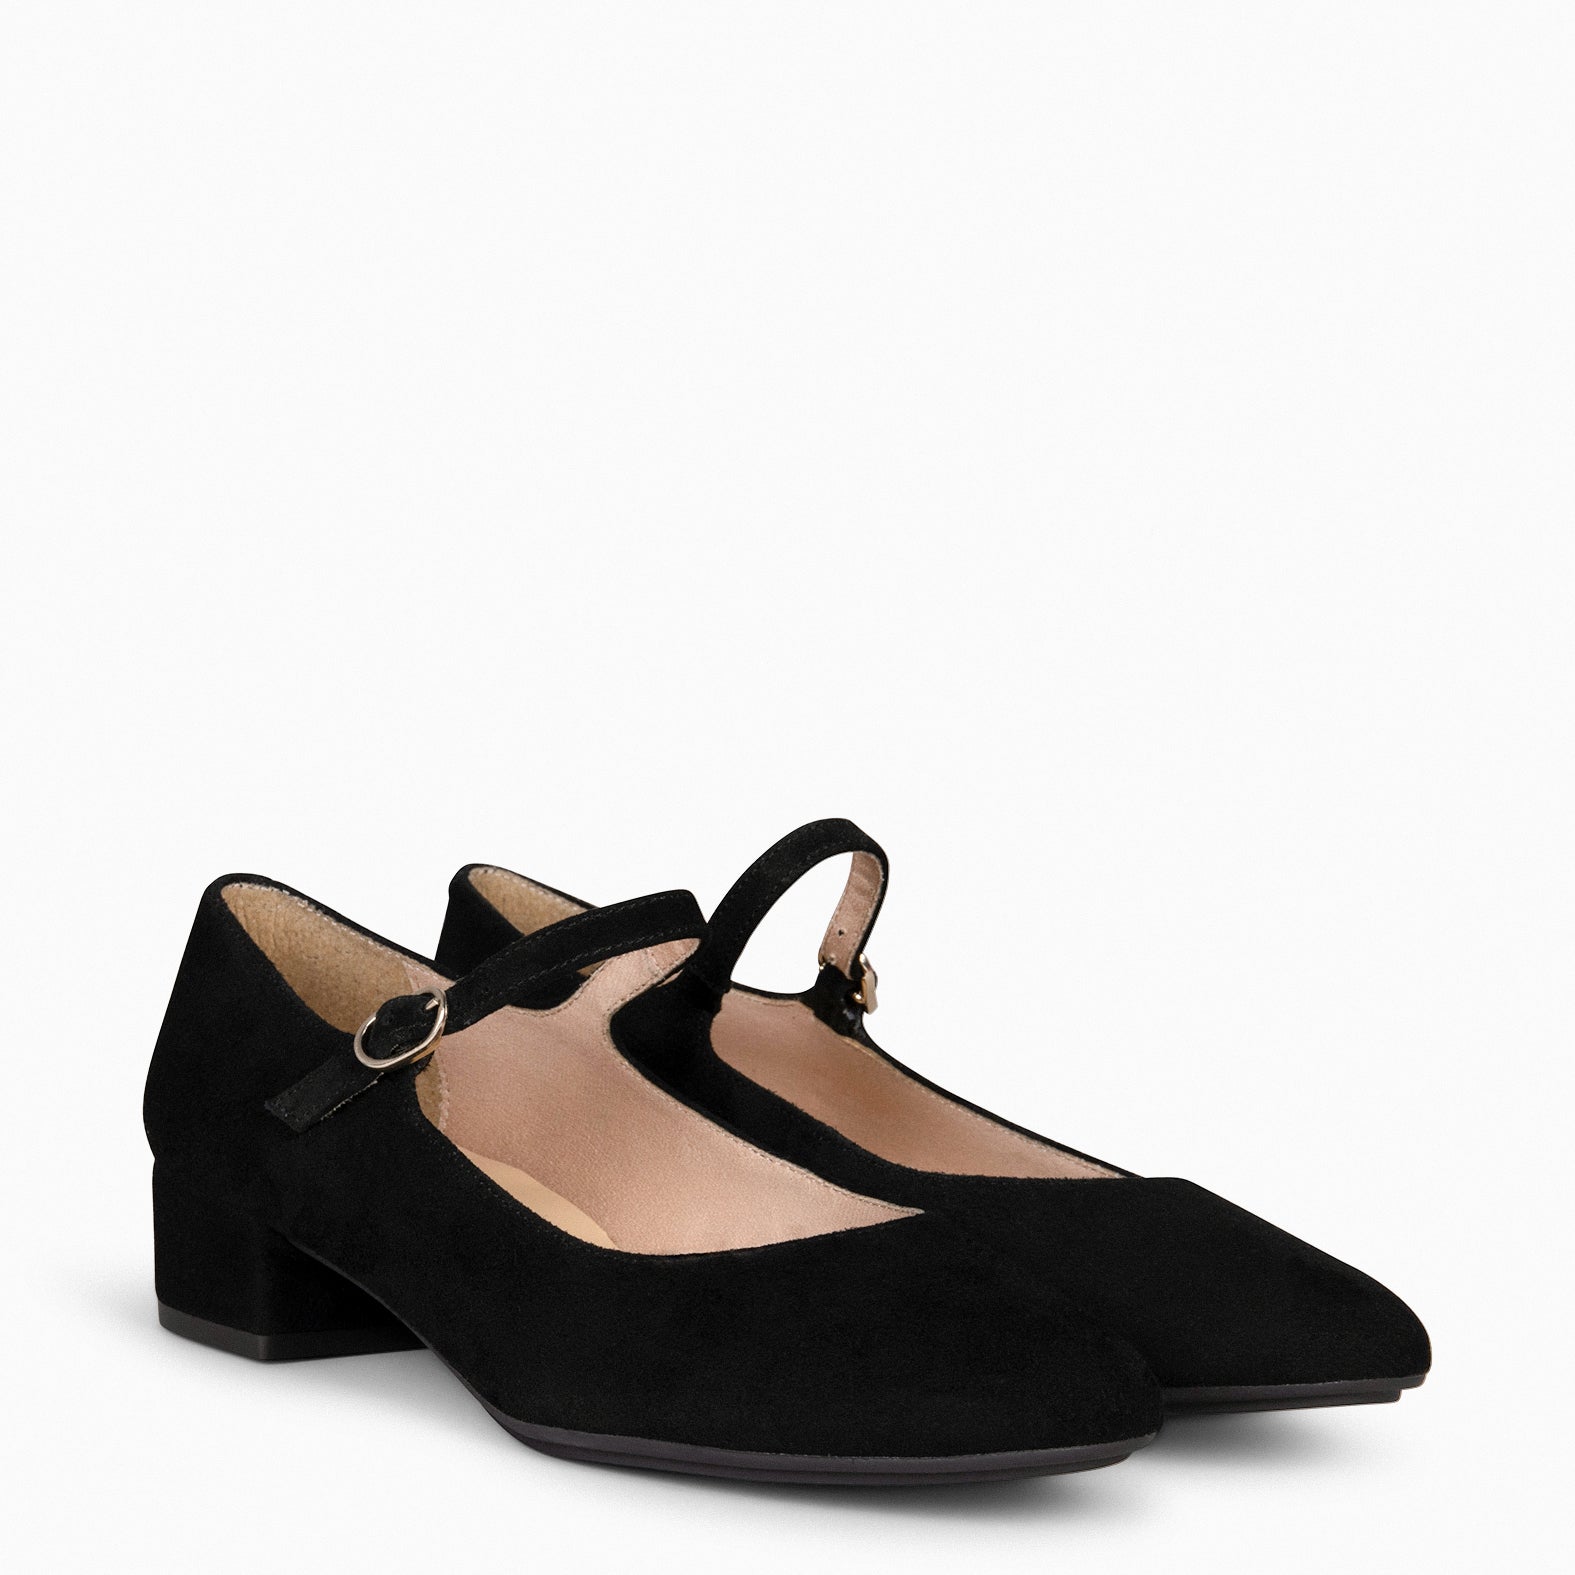 NORA – BLACK Mary-Janes with low heel 